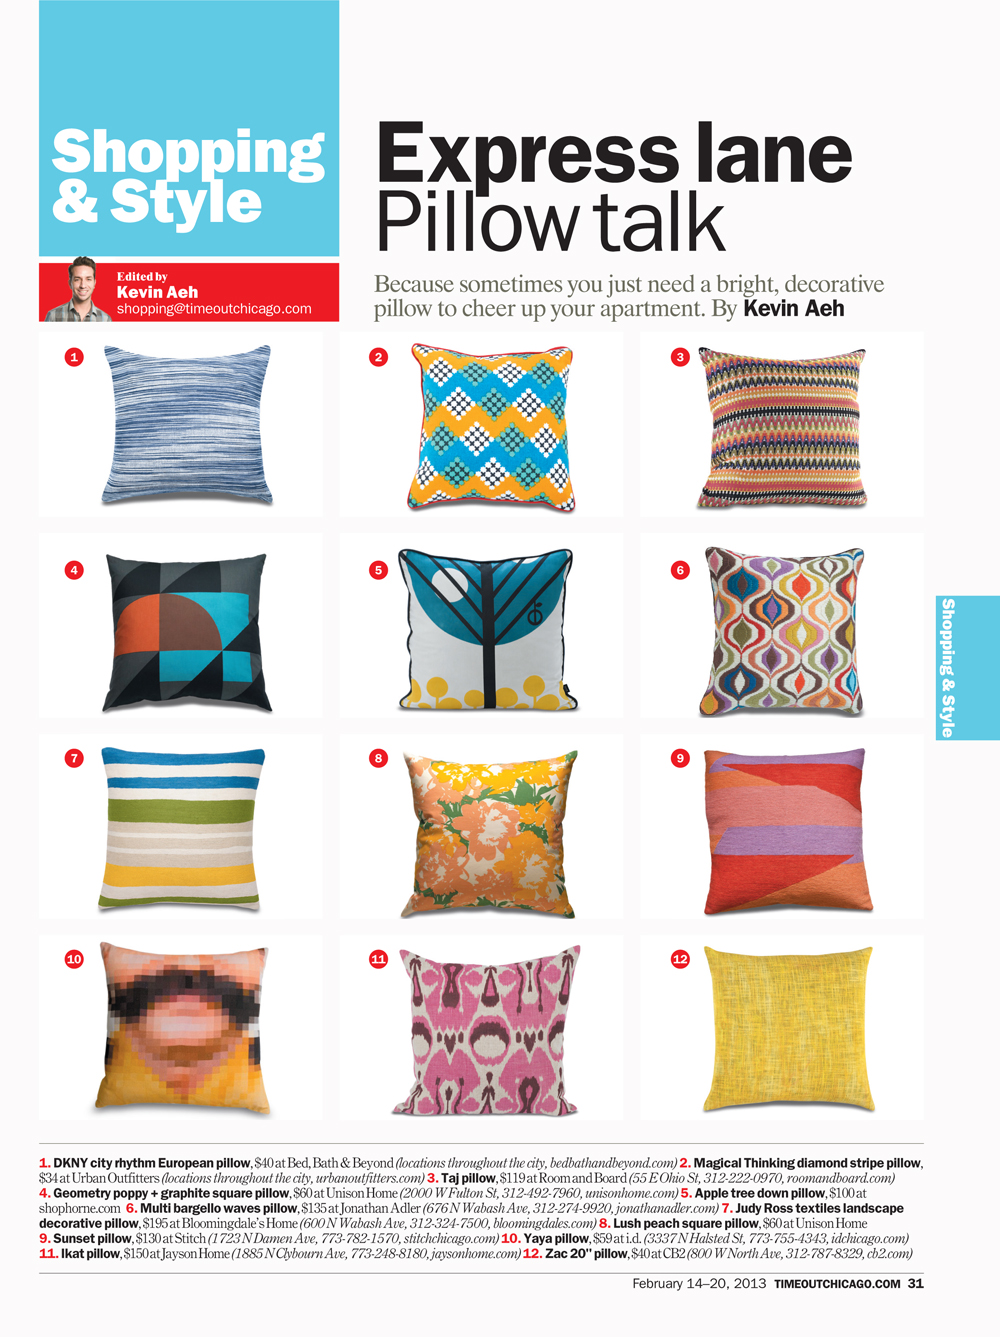 Geometry and Lush Pillows featured in TOC Feb 2013